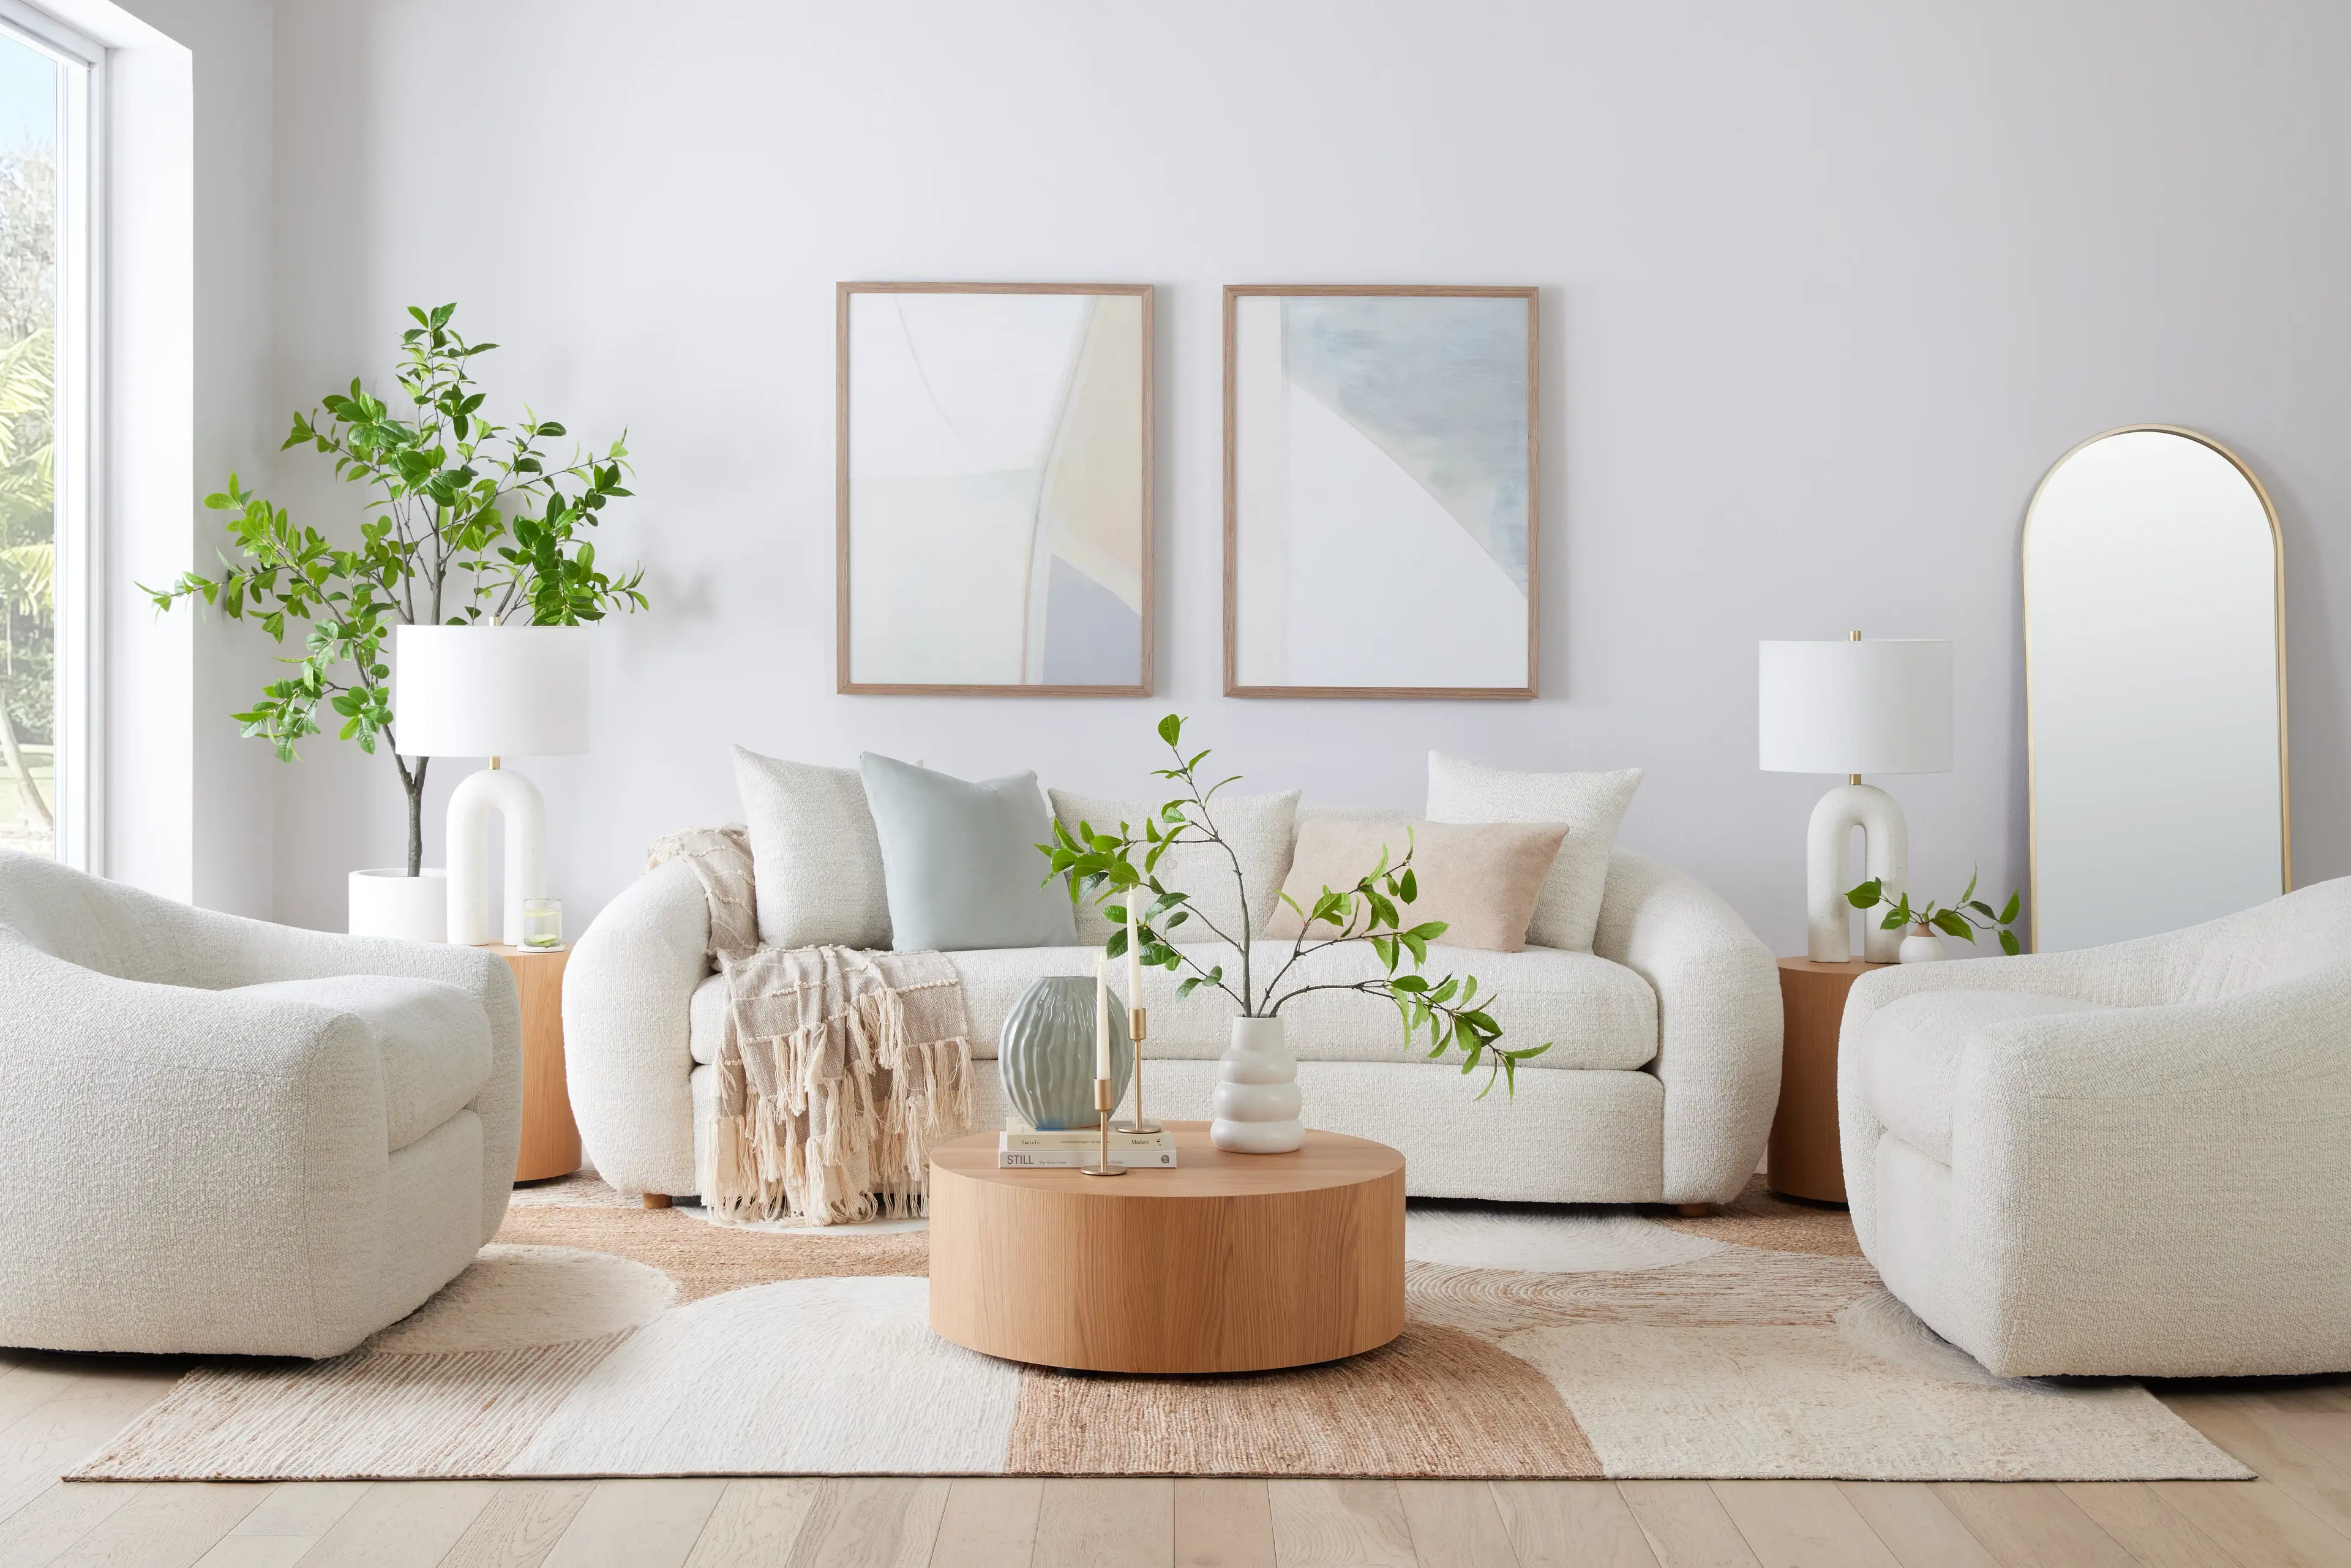  7 Cream Color Living Room Ideas That Feel Both Classic And Cozy